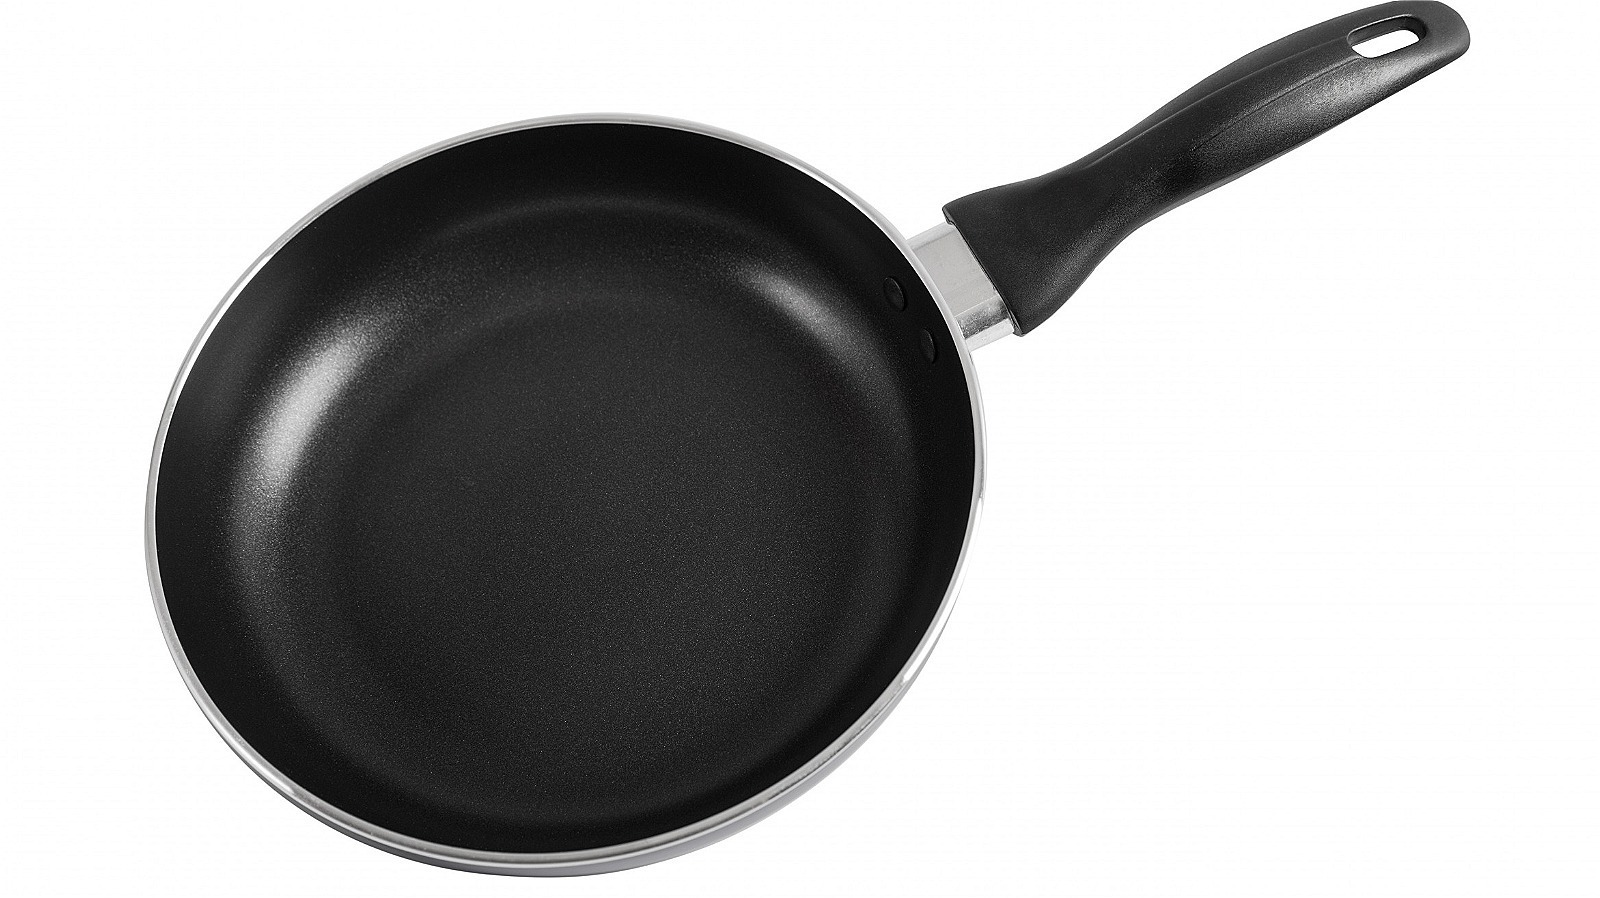 https://www.thedailymeal.com/img/gallery/heres-what-you-need-to-know-about-deep-frying-in-a-nonstick-pan/l-intro-1673031286.jpg